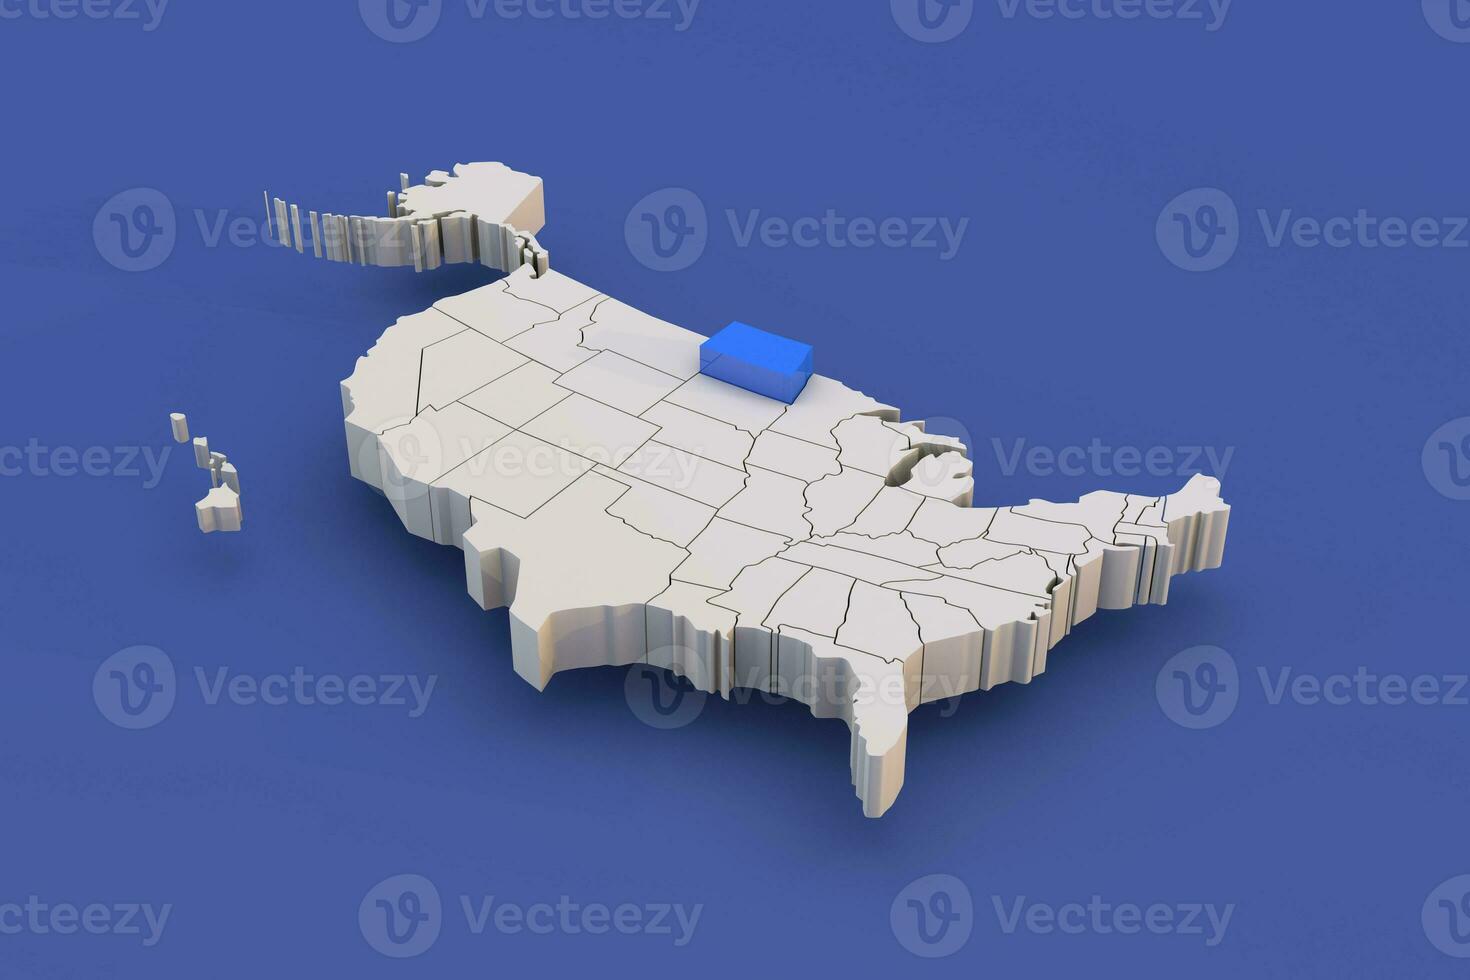 North Dakota state of USA map with white states a 3D united states of america map photo